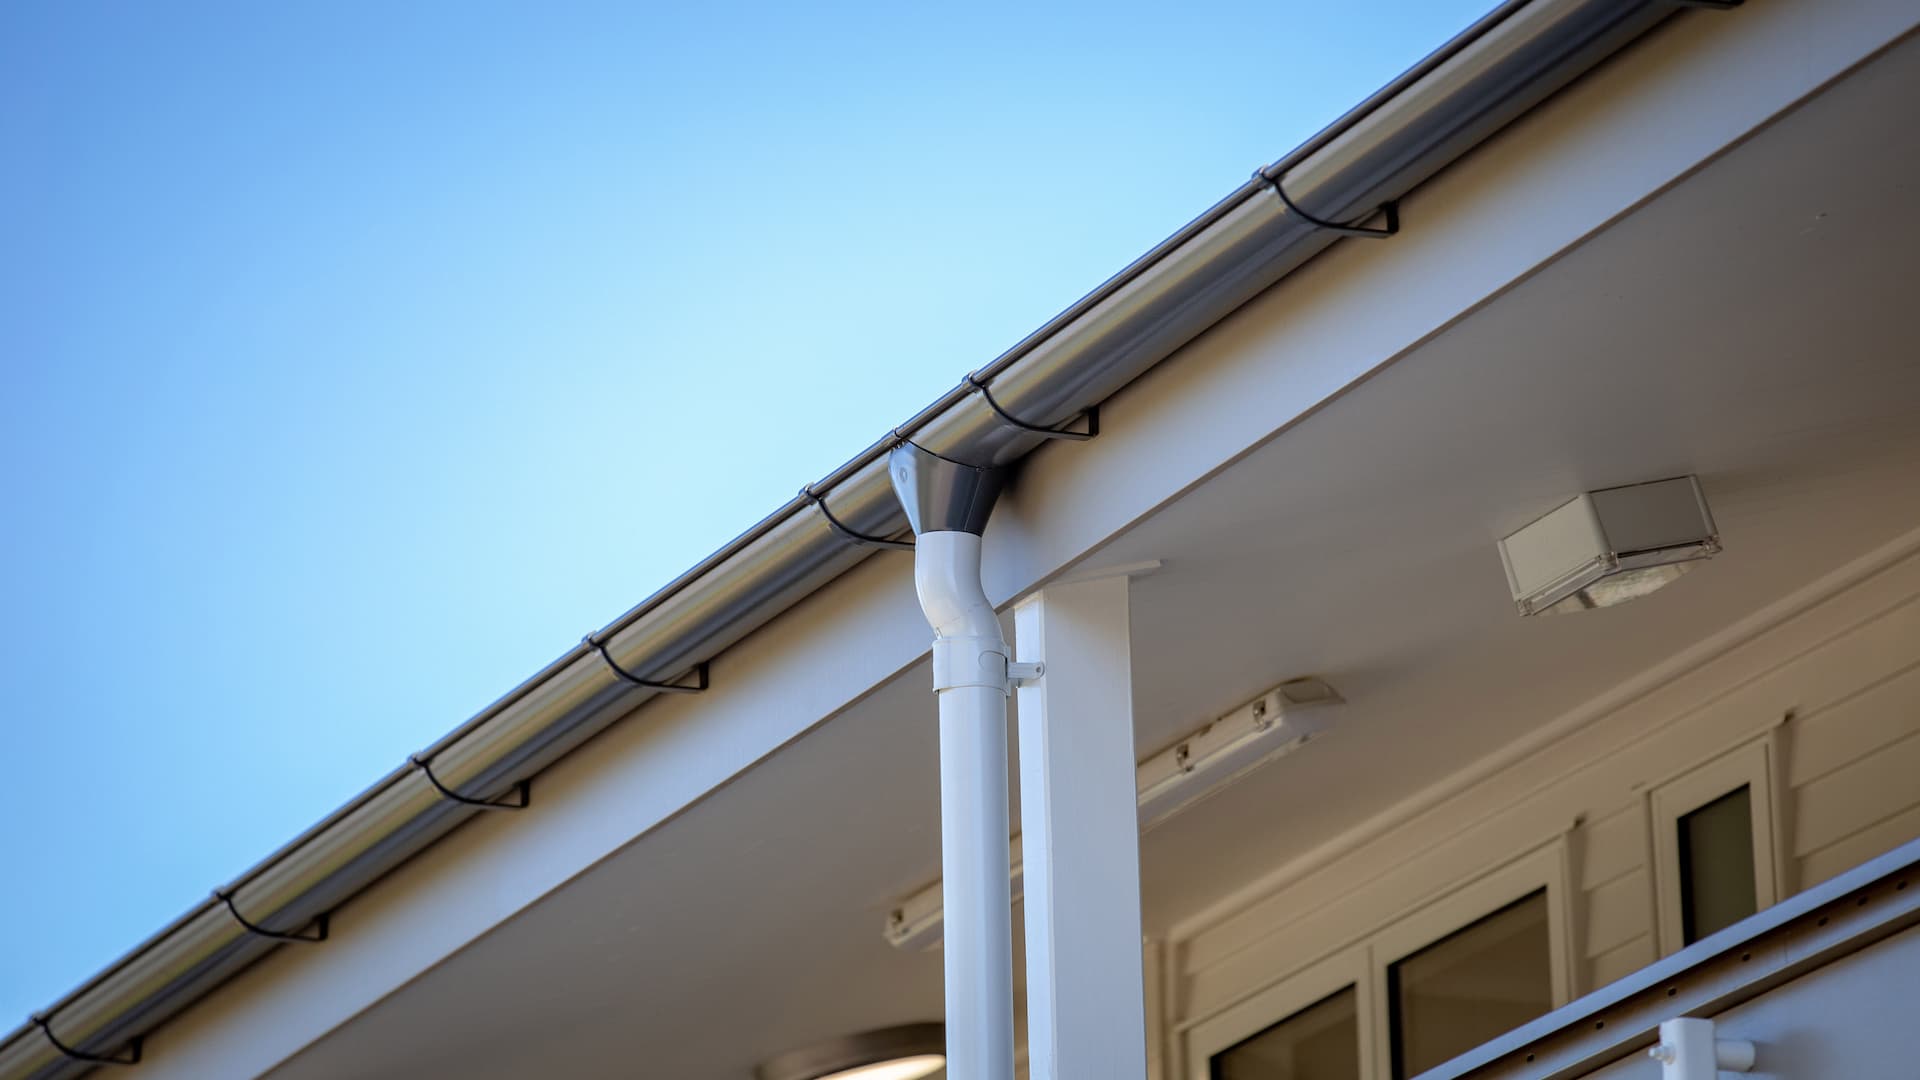 Half-round gutter system solution used on a house